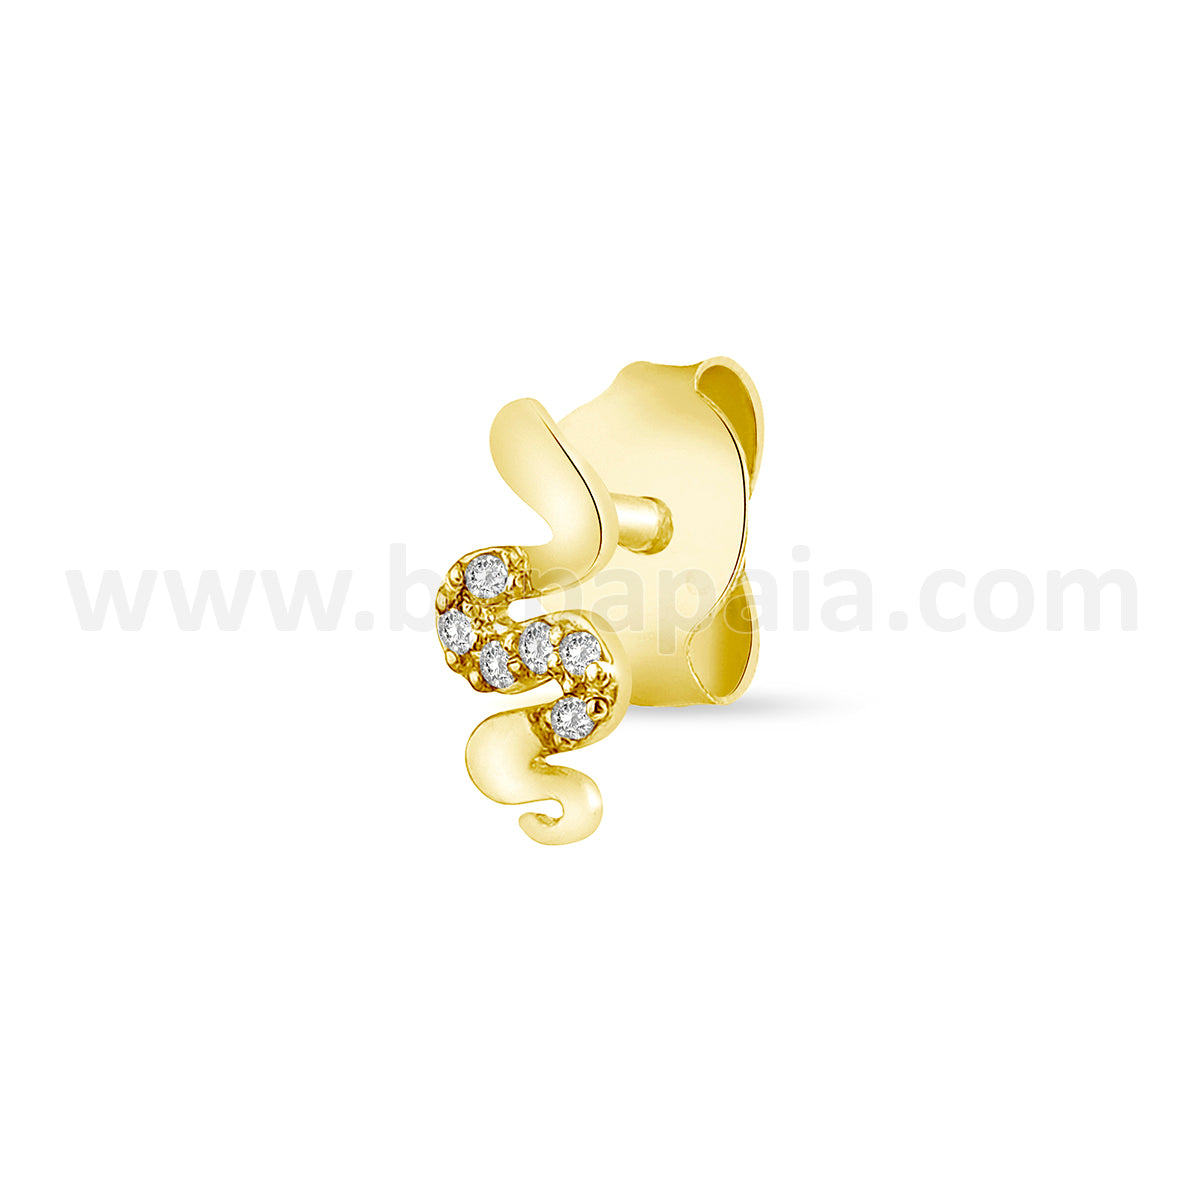 Silver ear stud with snake and gems